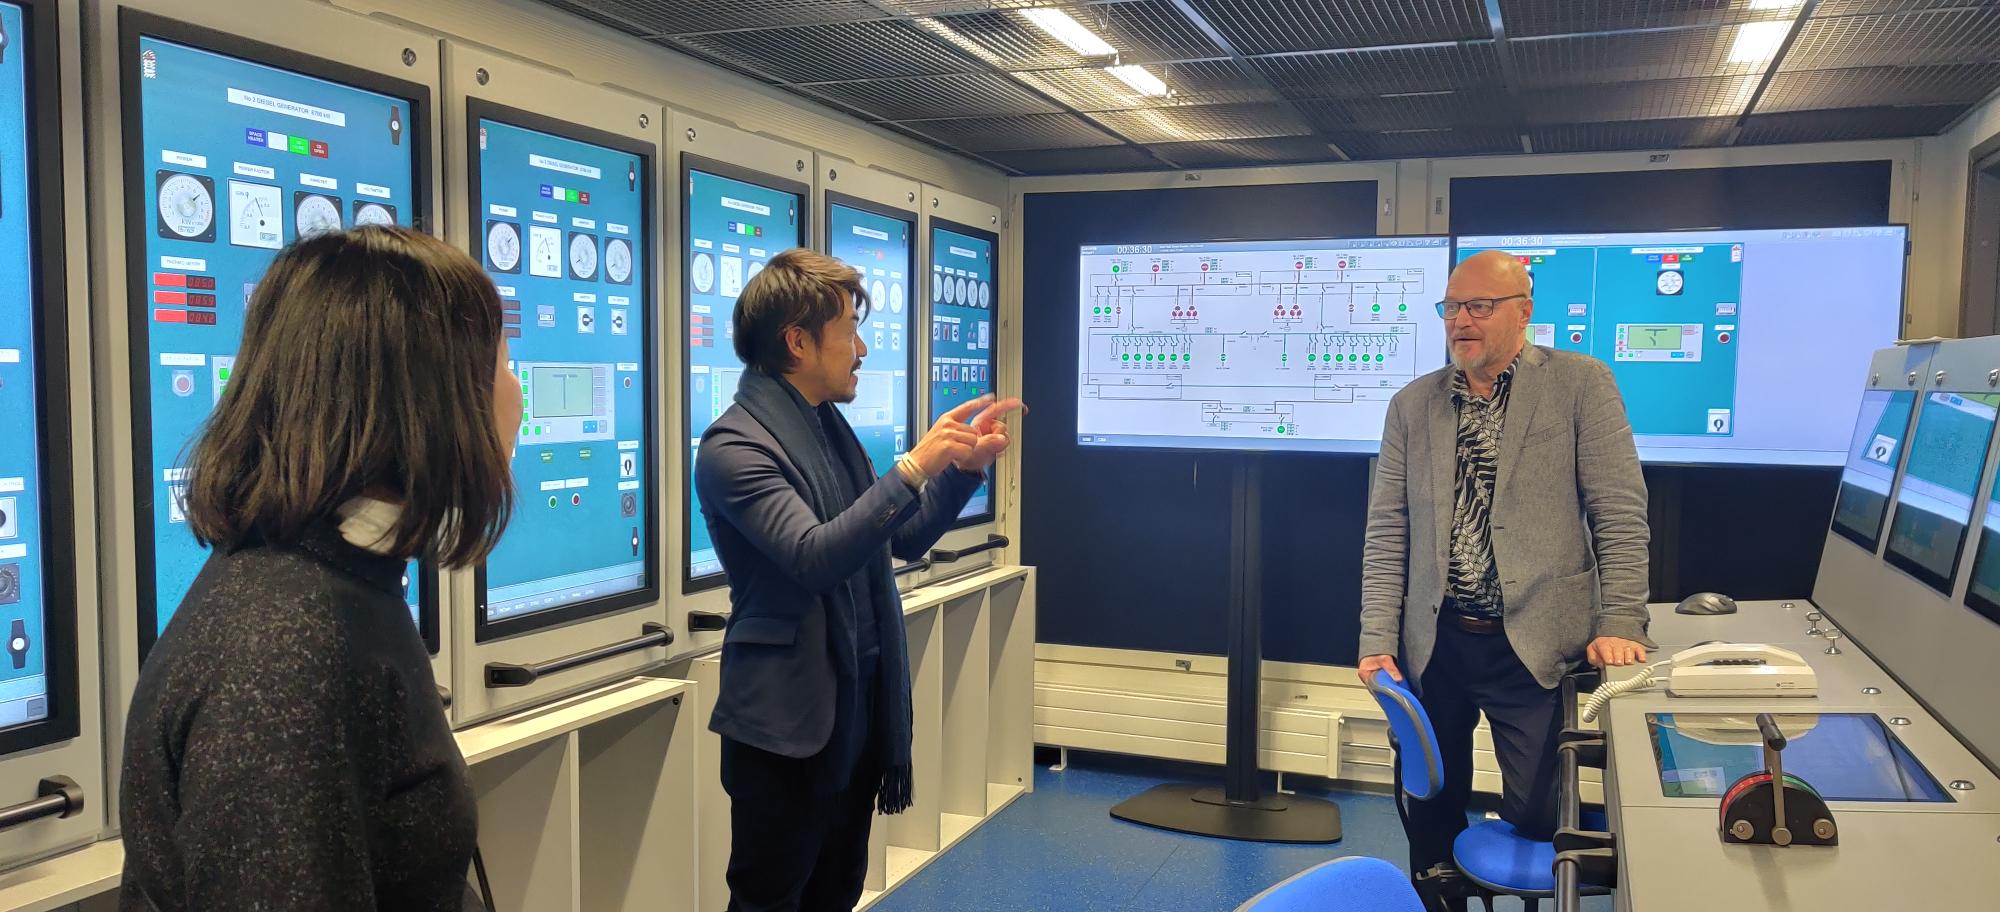 Yusuke Mori, Shigemi Matsuzaki and Heikki Koivisto discuss in the simulation control room. Large screens with graphs in the background.